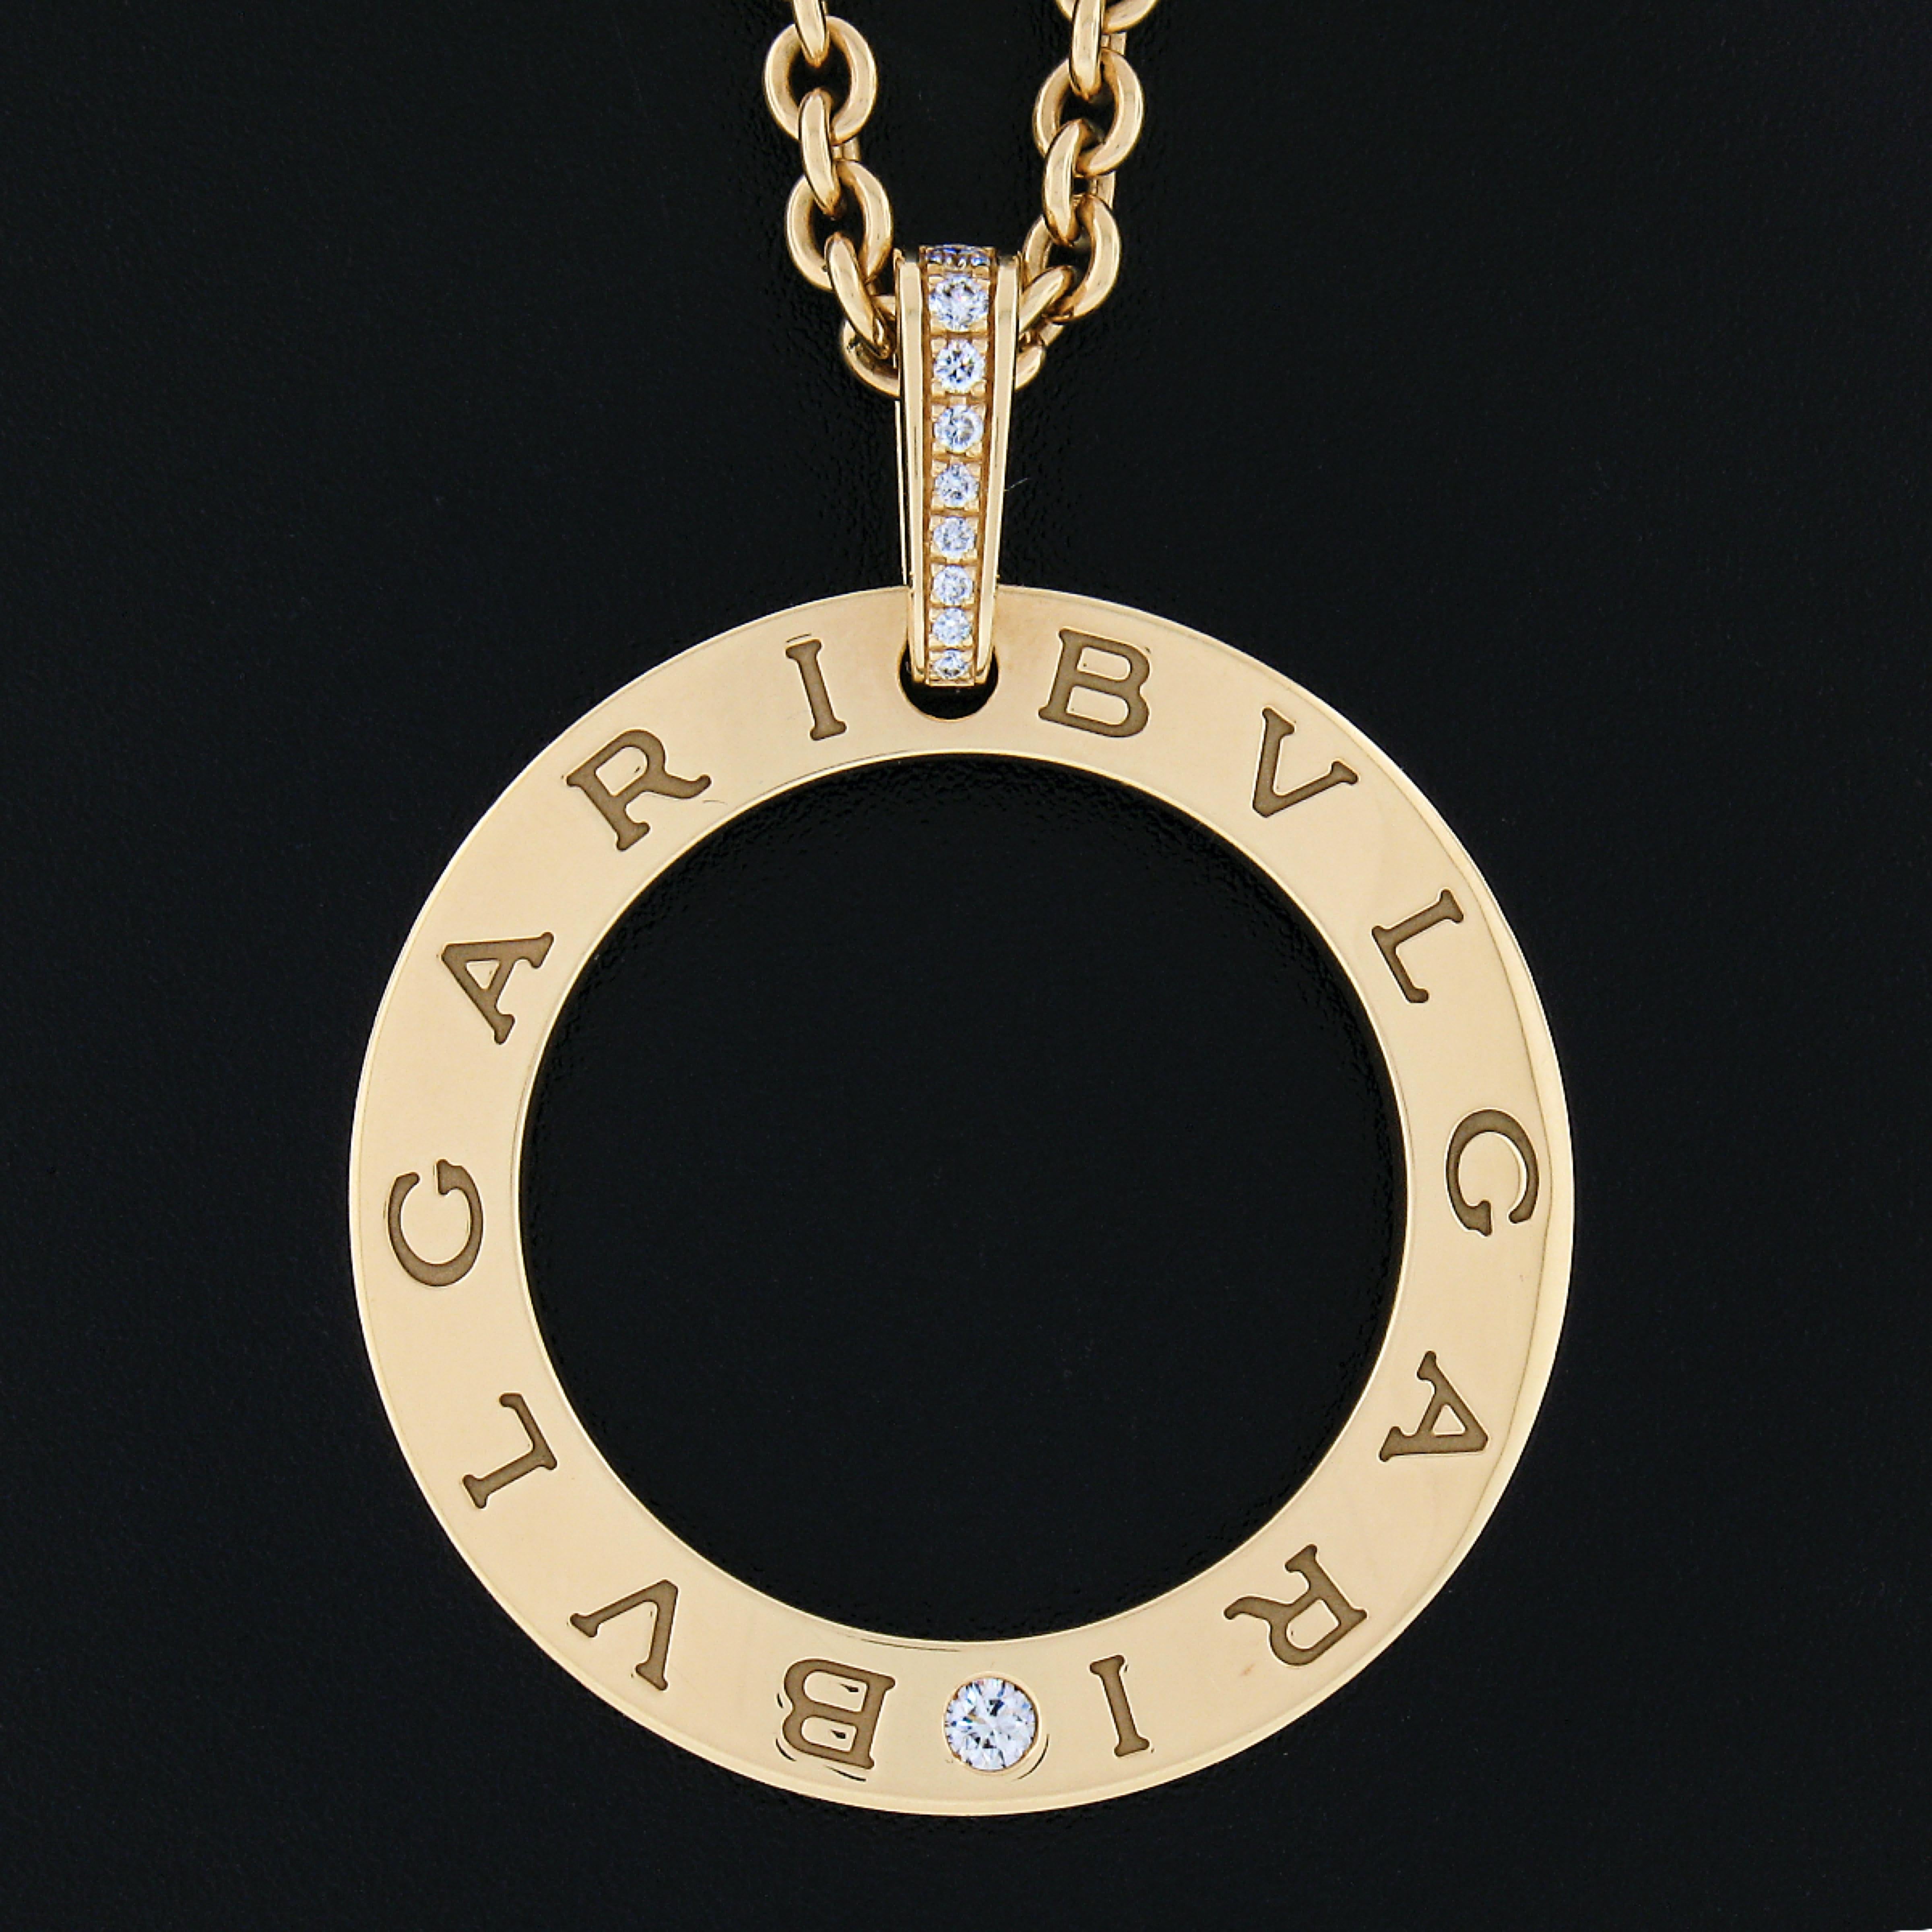 Here we have a gorgeous, 100% authentic, Bulagri statement pendant necklace crafted from solid 18k yellow gold. The pendant is a wavy open circle burnish set with a round brilliant diamond at the bottom and a slightly graduated bail pavé set with 9